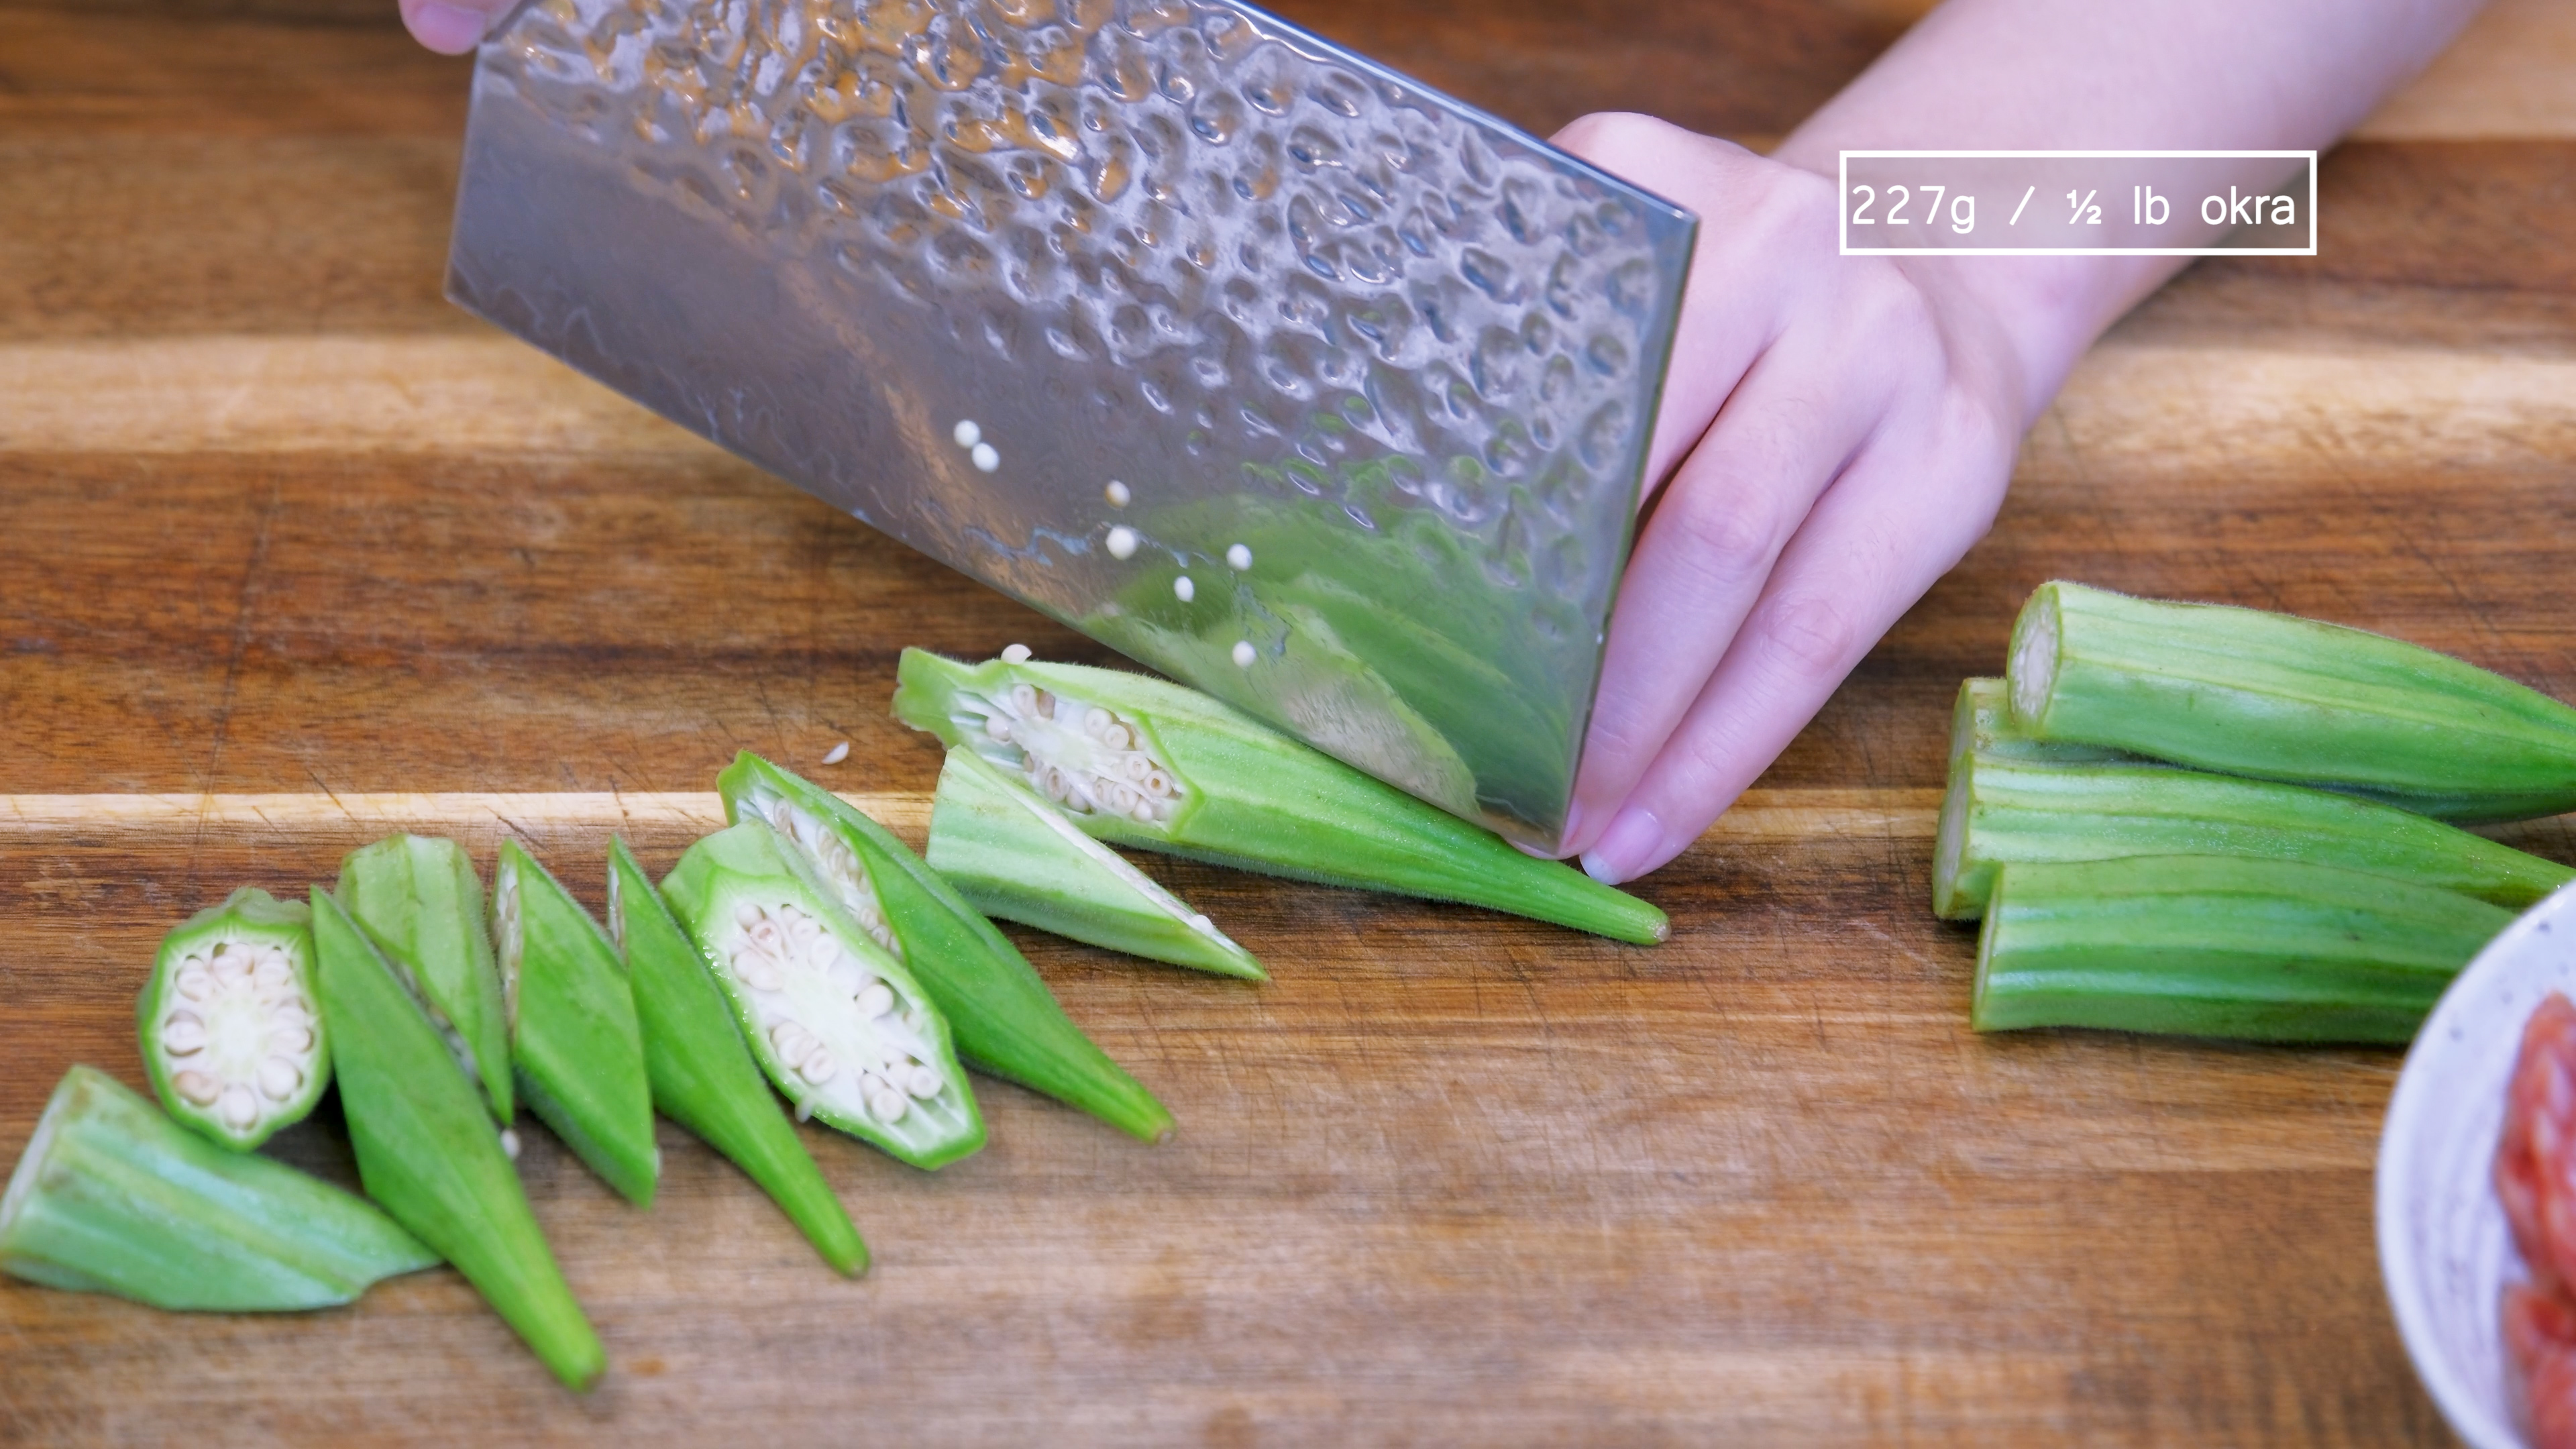 Image of Cut of the calyx of the of okra, then cut...